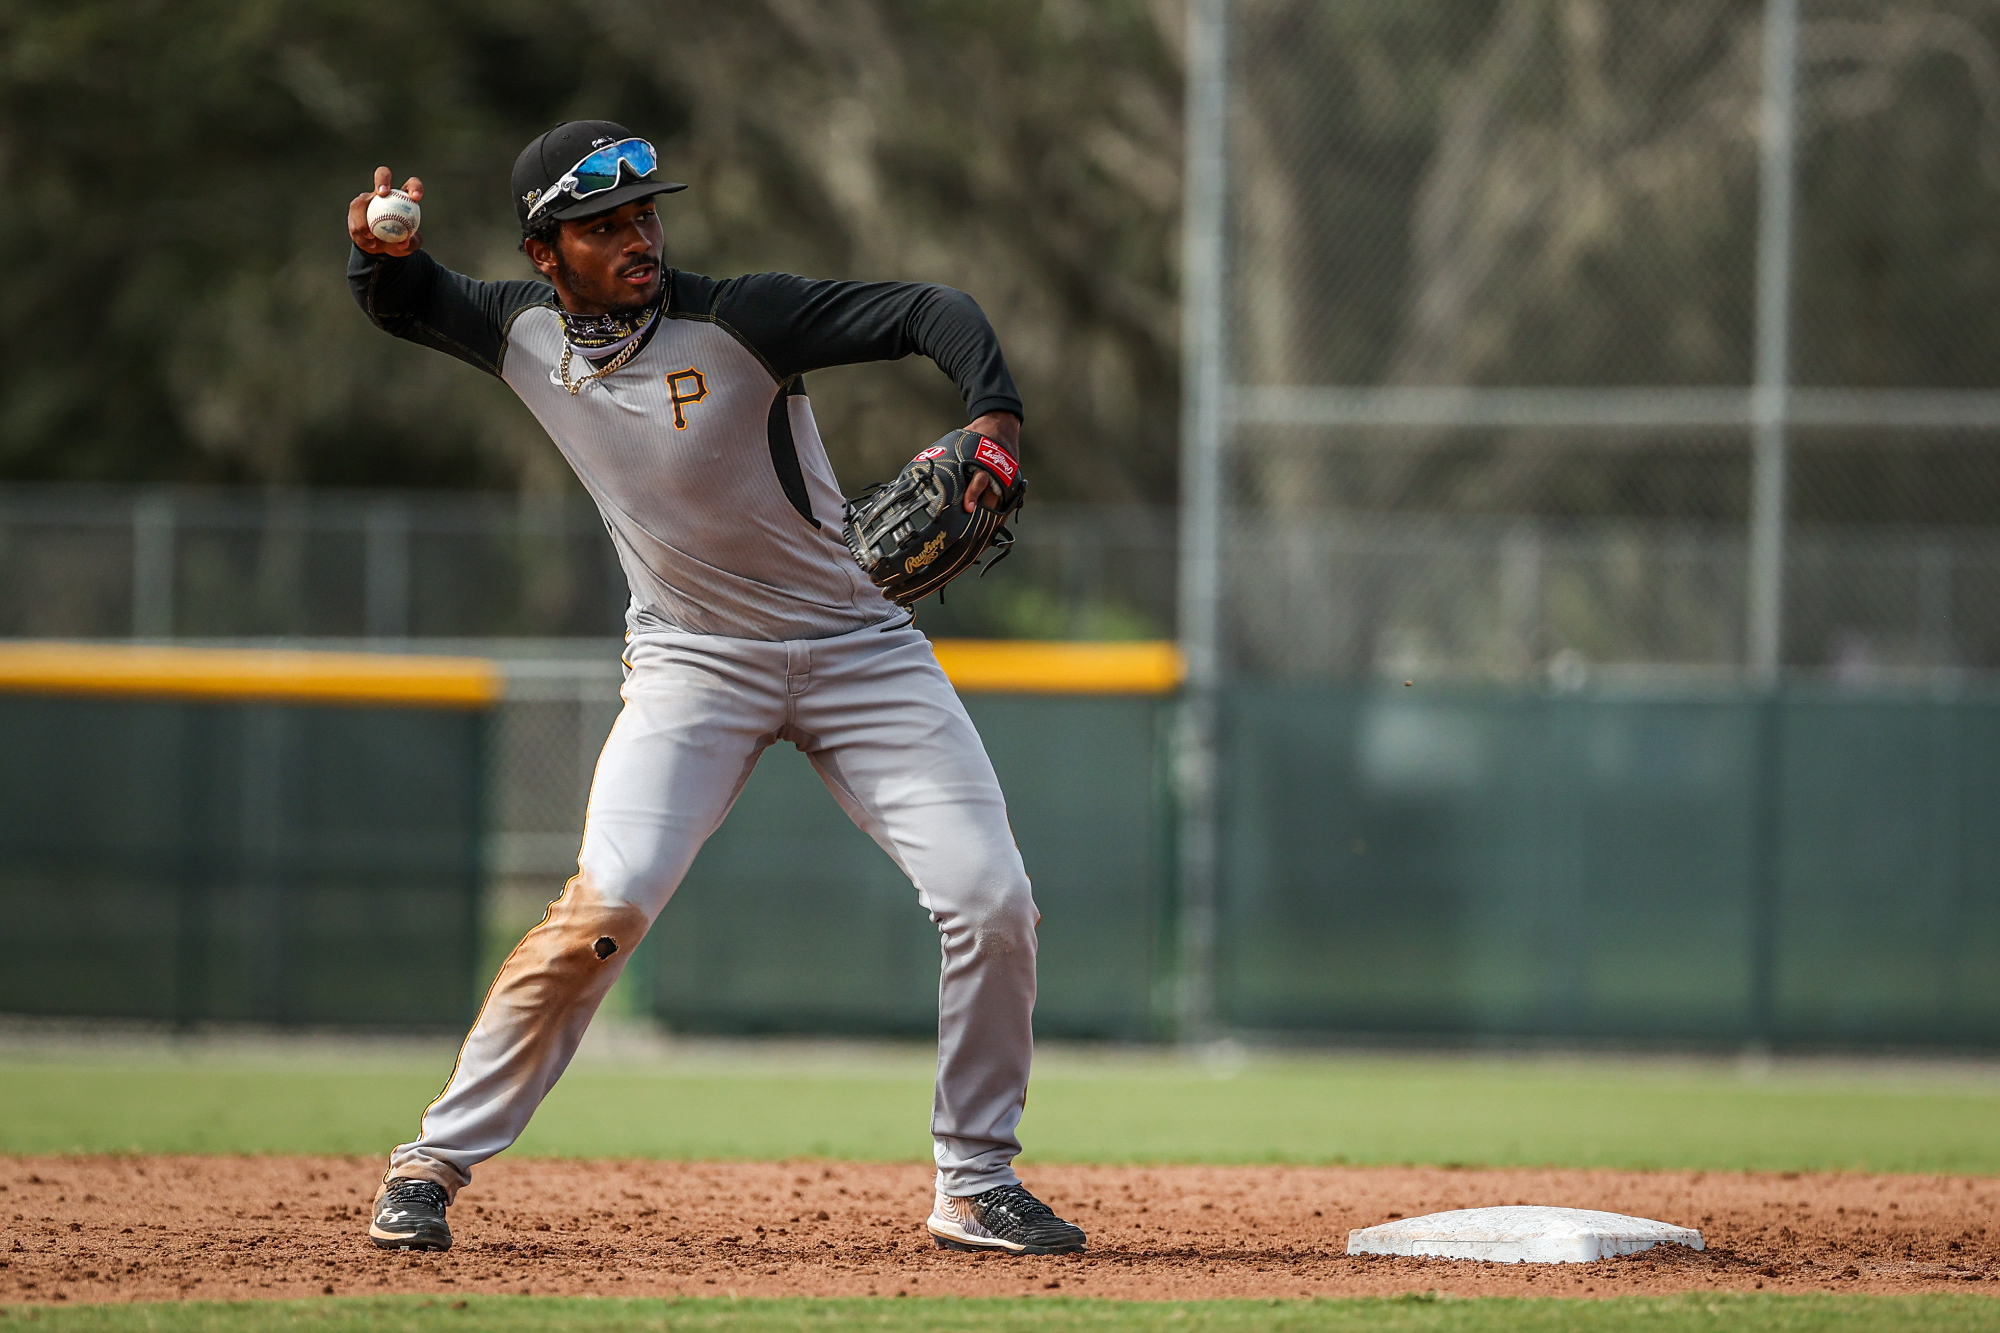 With His Bat on Fire, Liover Peguero Looks to Fix Throwing Issues